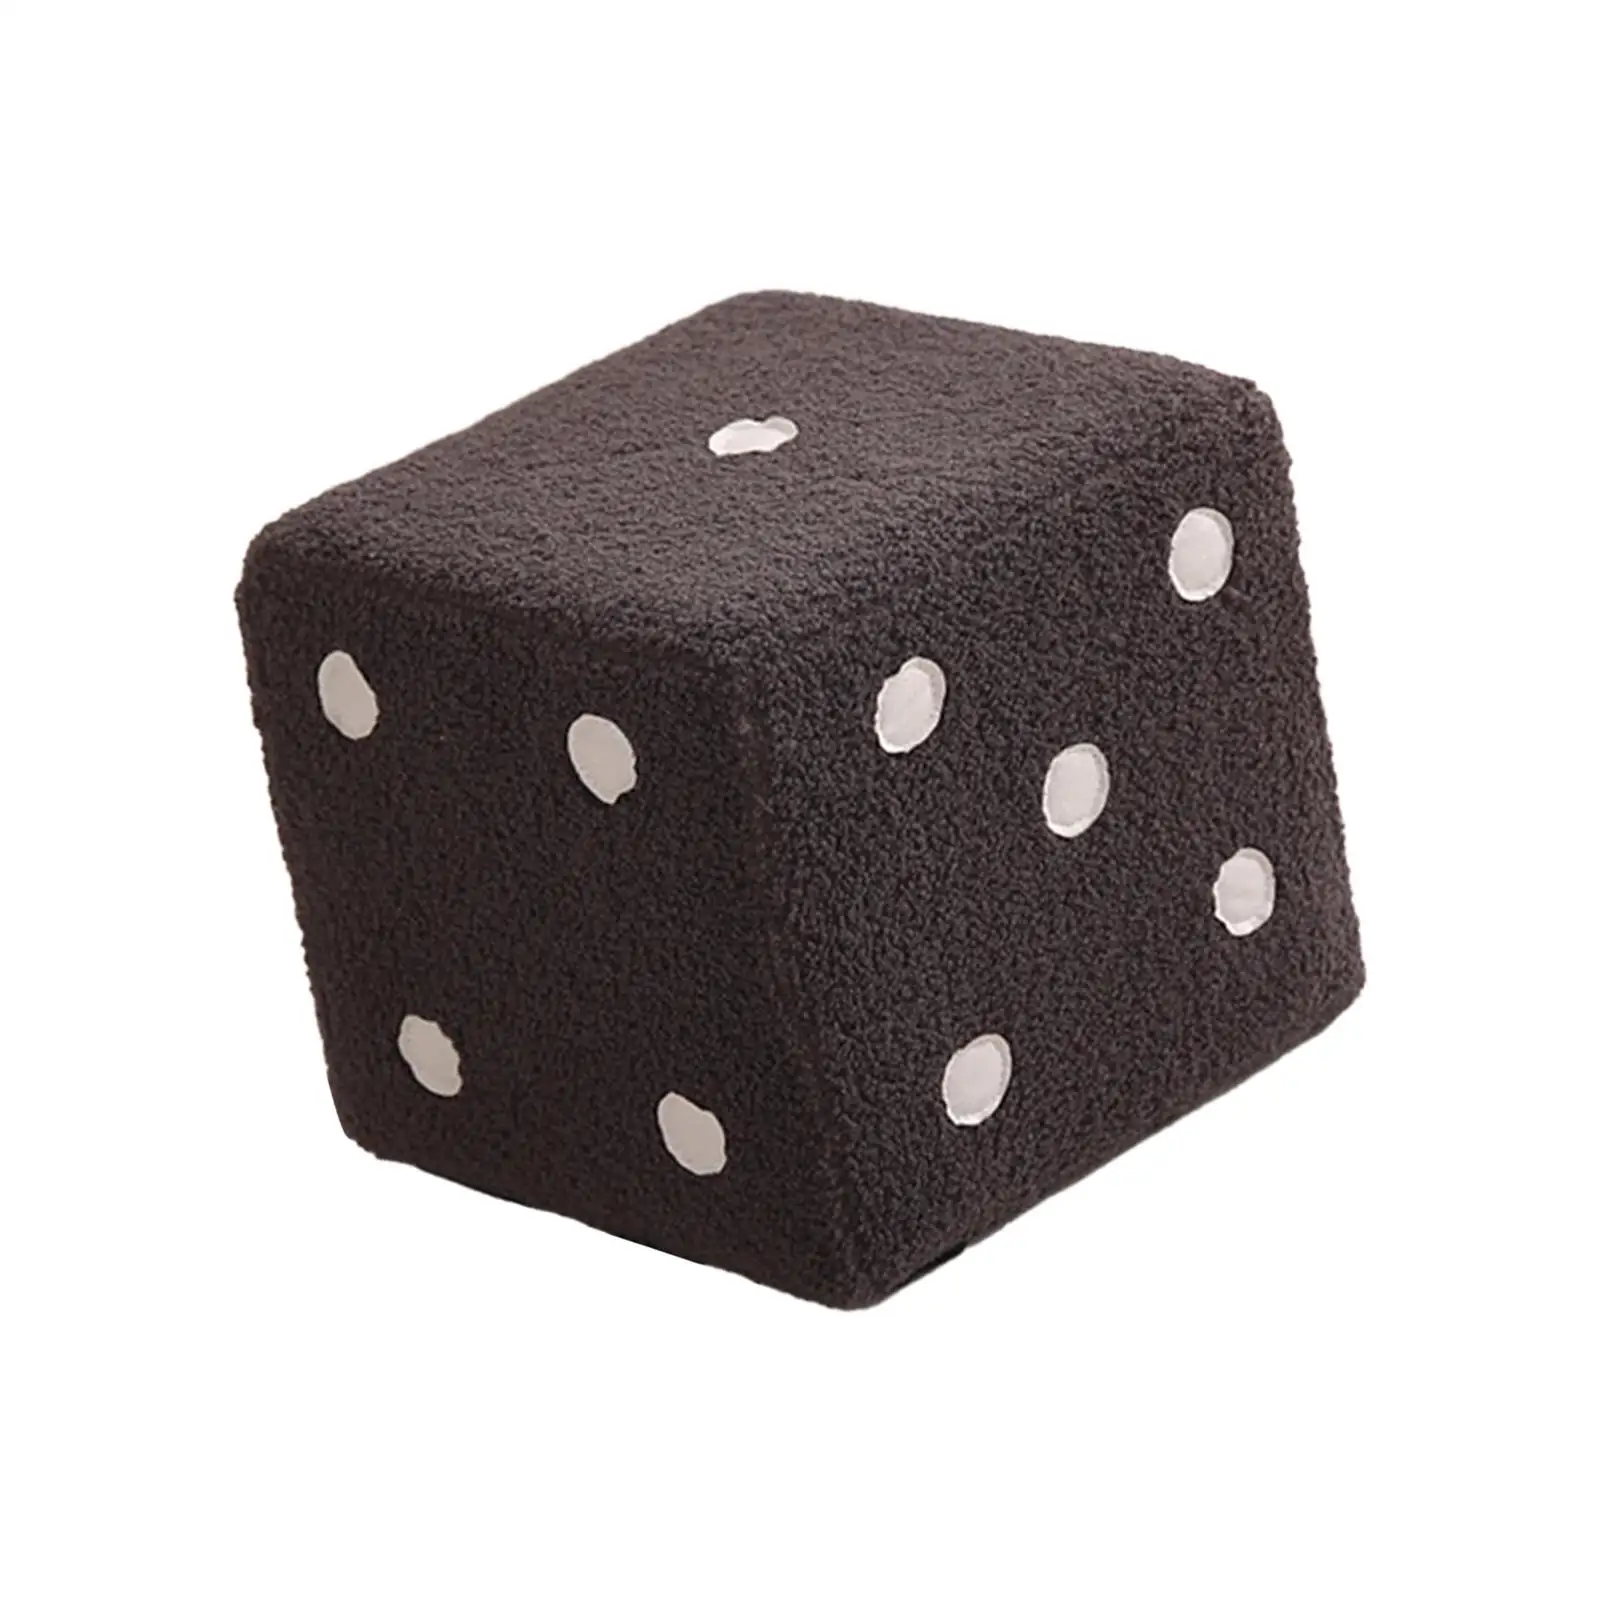 Dice Cubic Foot Stool Non Slip Furniture Shoe Changing Stool Dice Cube Ottoman for Apartment Entryway Dressing Room Home Doorway